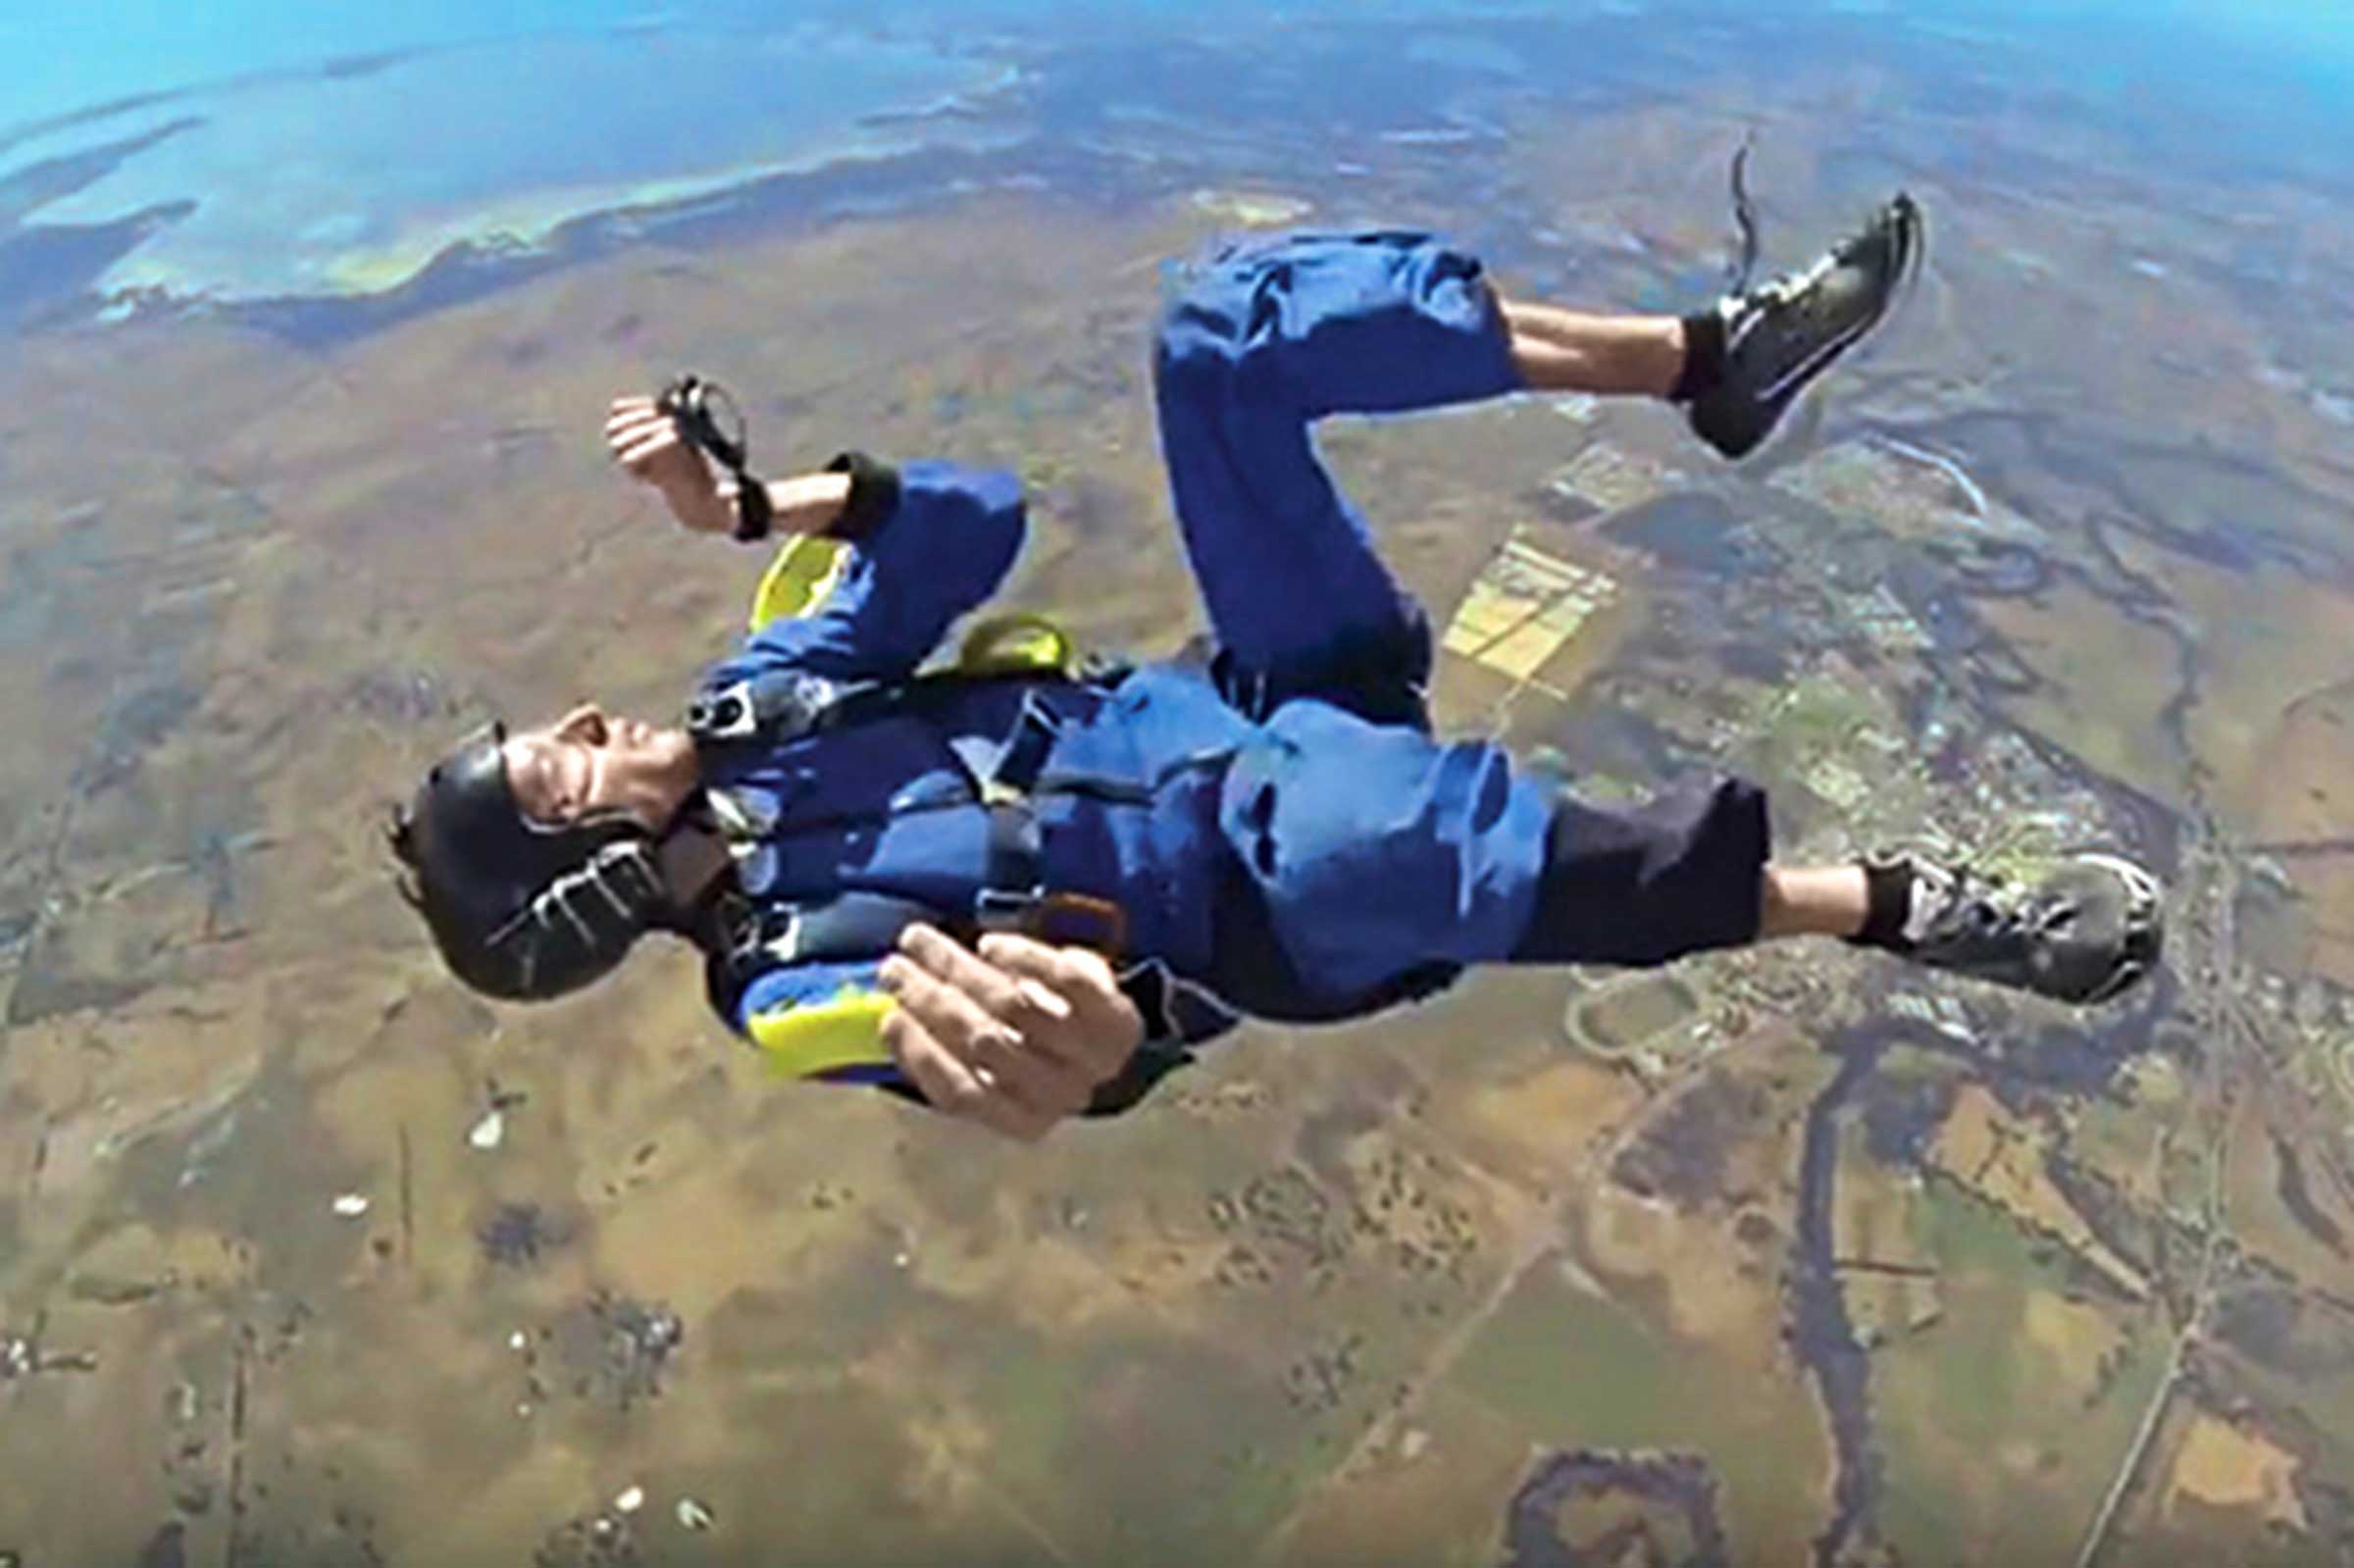 At 12,000 Feet Up, This Skydiver Has A Seizure | Reader's Digest